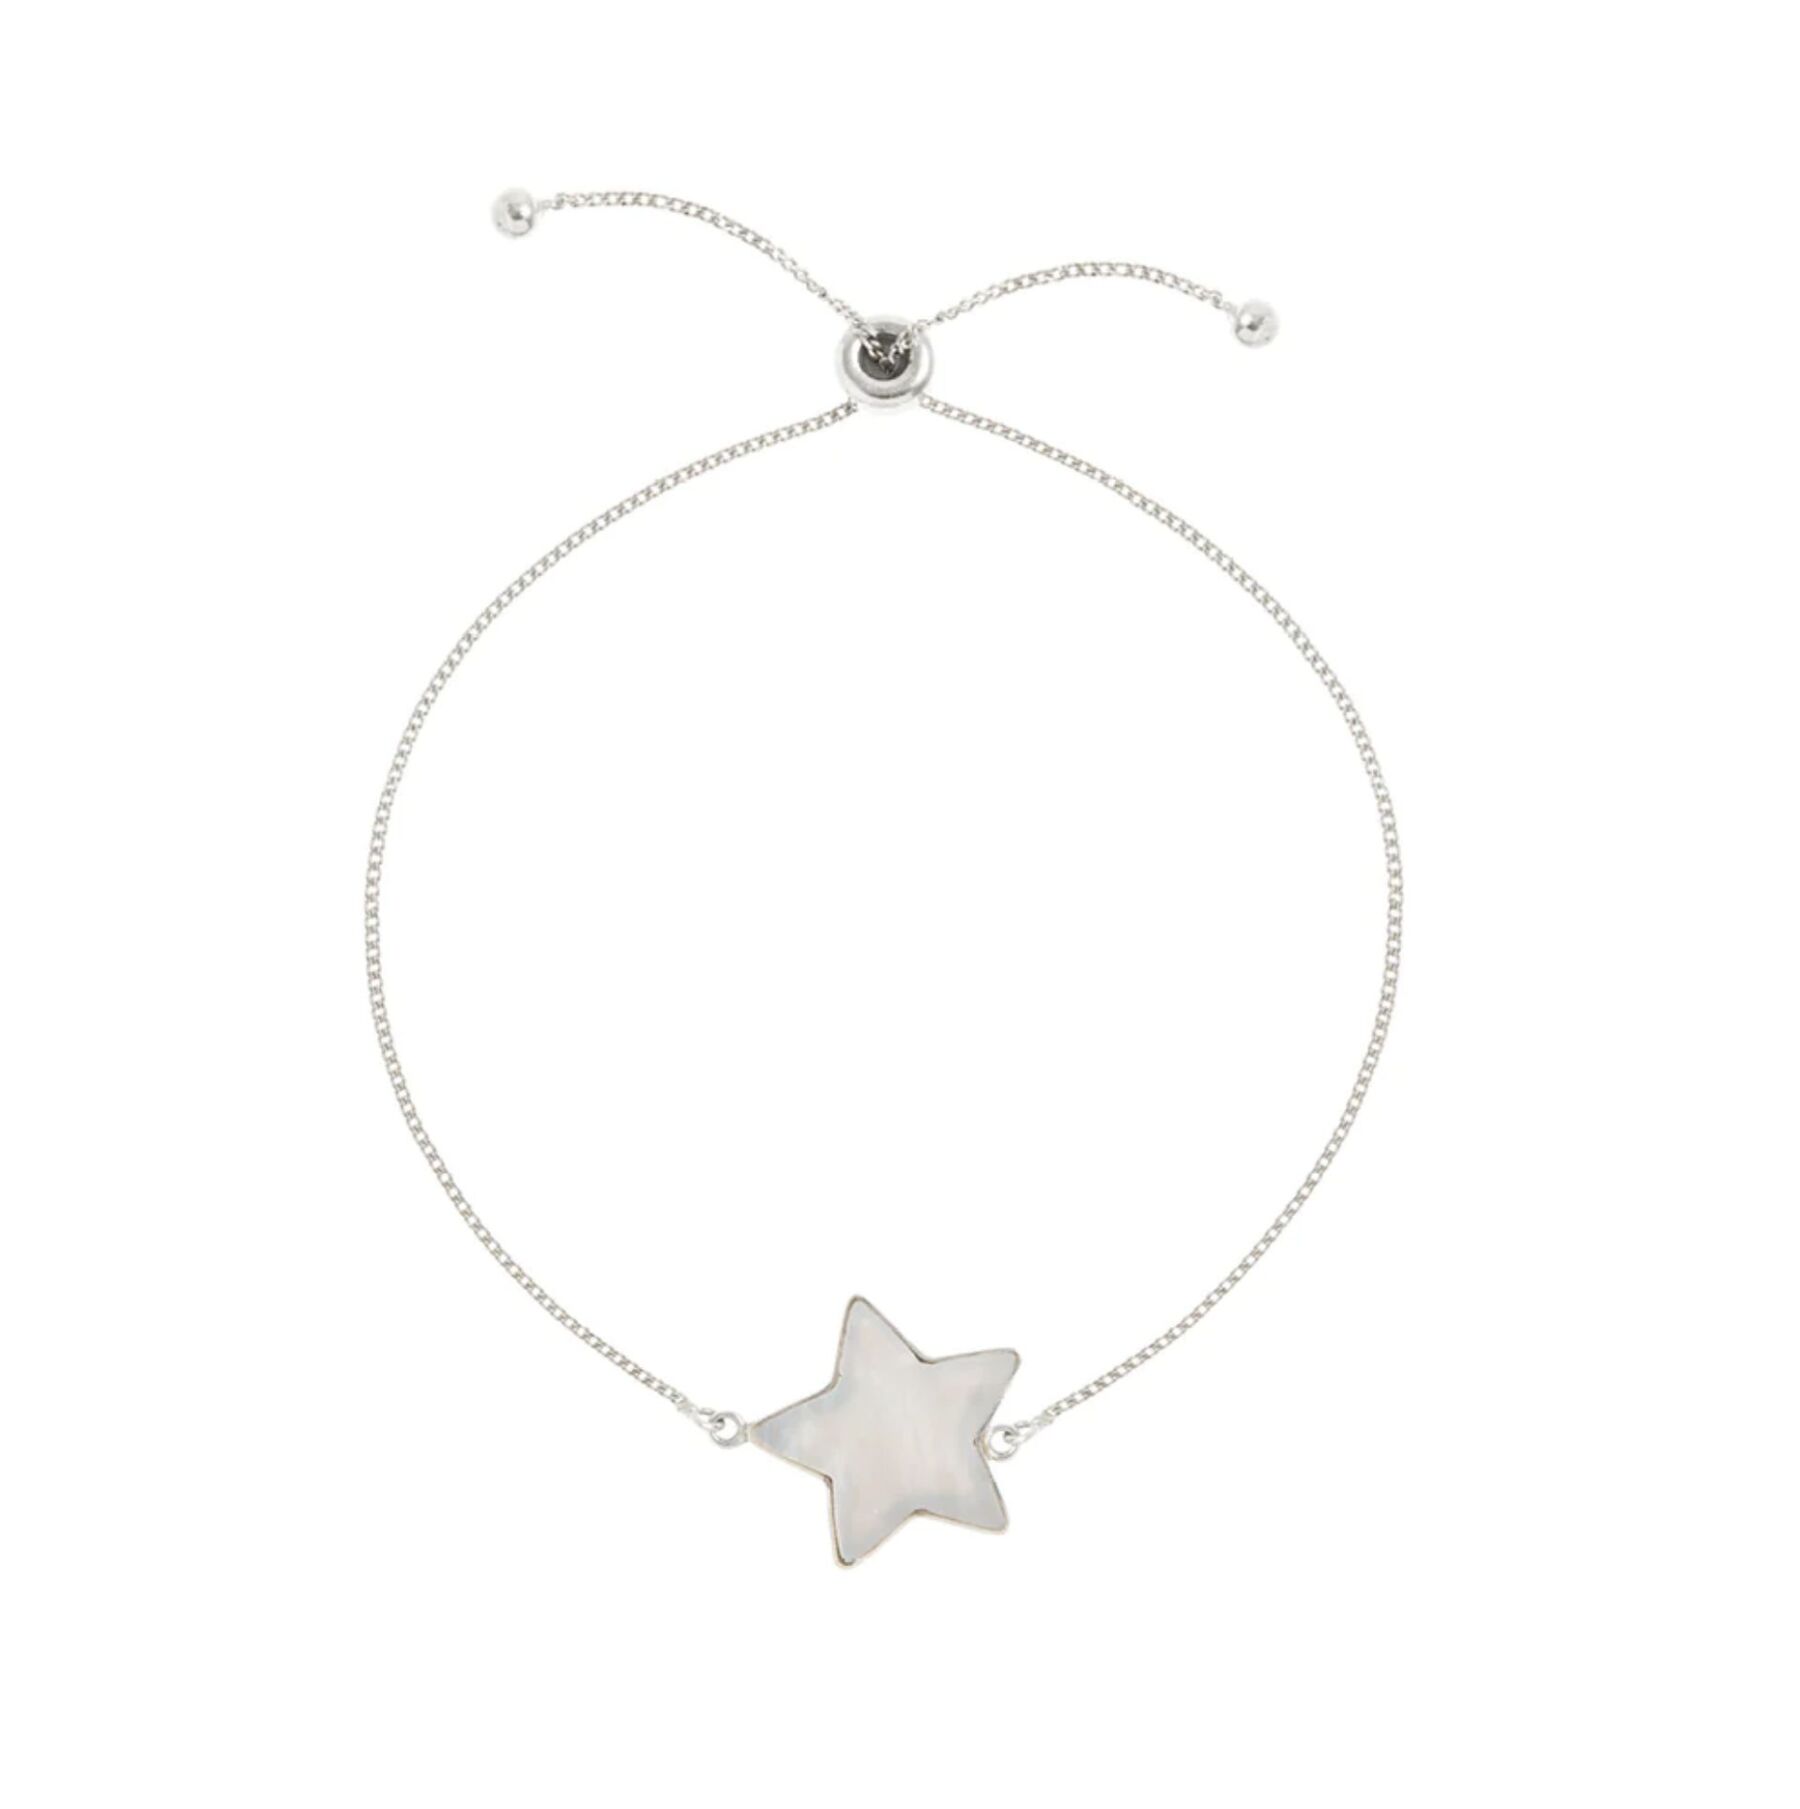 Adjustable Bracelet in Sterling Silver with Mother of Pearl Star, by Freya Rose London